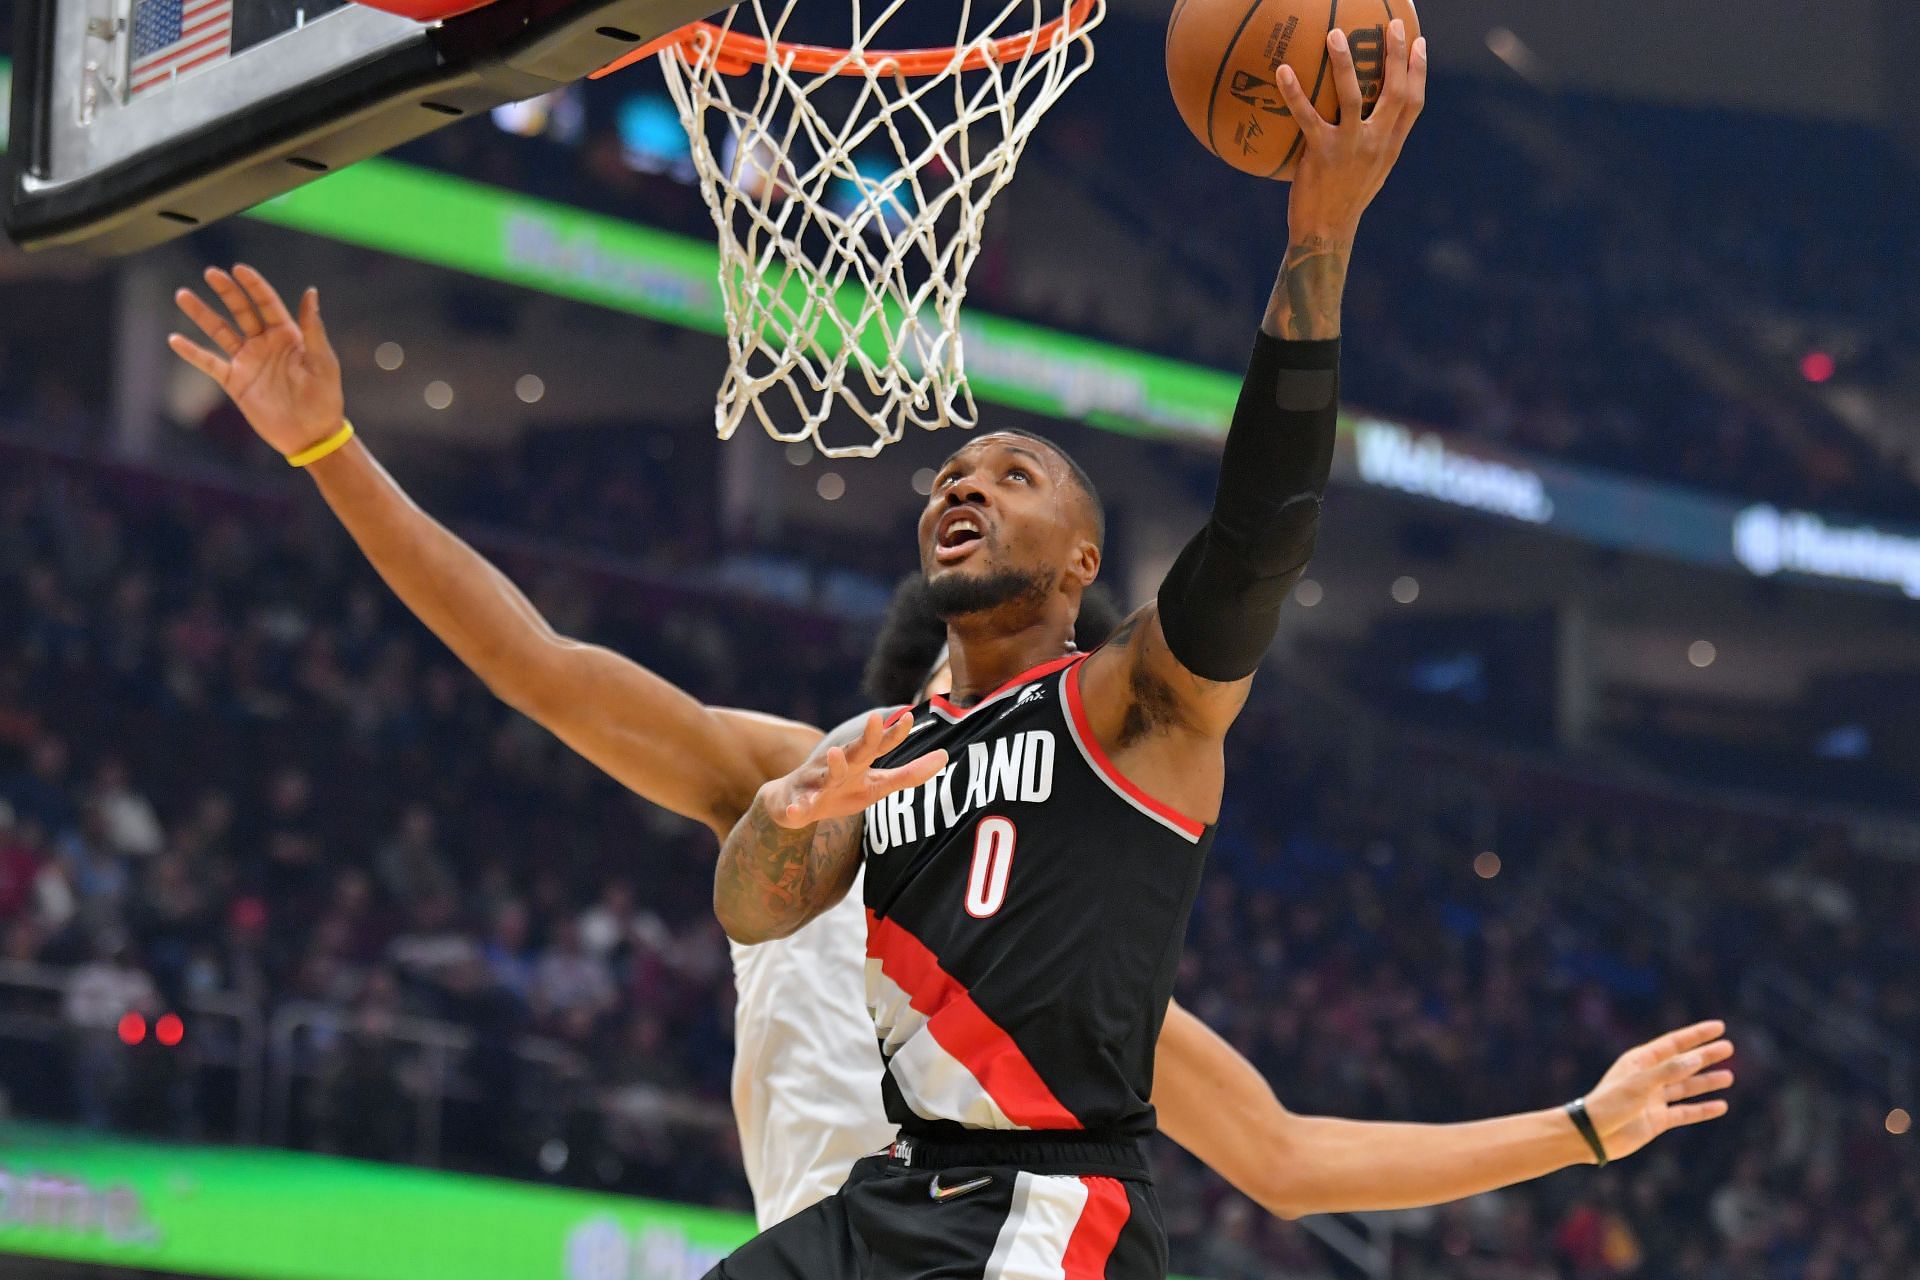 Damian Lillard #0 of the Portland Trail Blazers goes up for a shot against Jarrett Allen #31 of the Cleveland Cavaliers during the first half at Rocket Mortgage Fieldhouse on November 03, 2021 in Cleveland, Ohio.